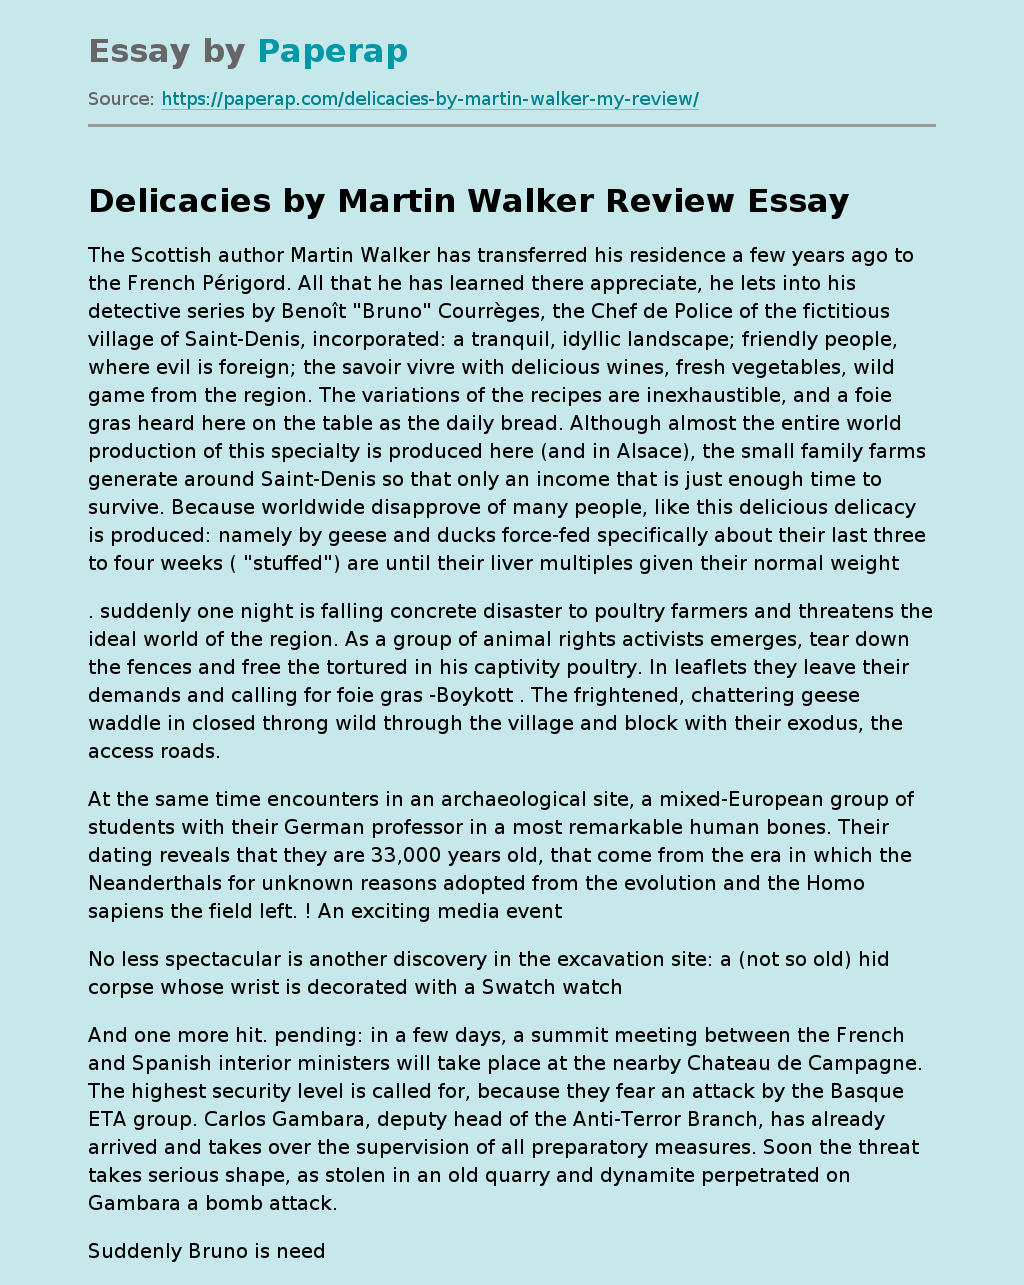 Delicacies by Martin Walker Review